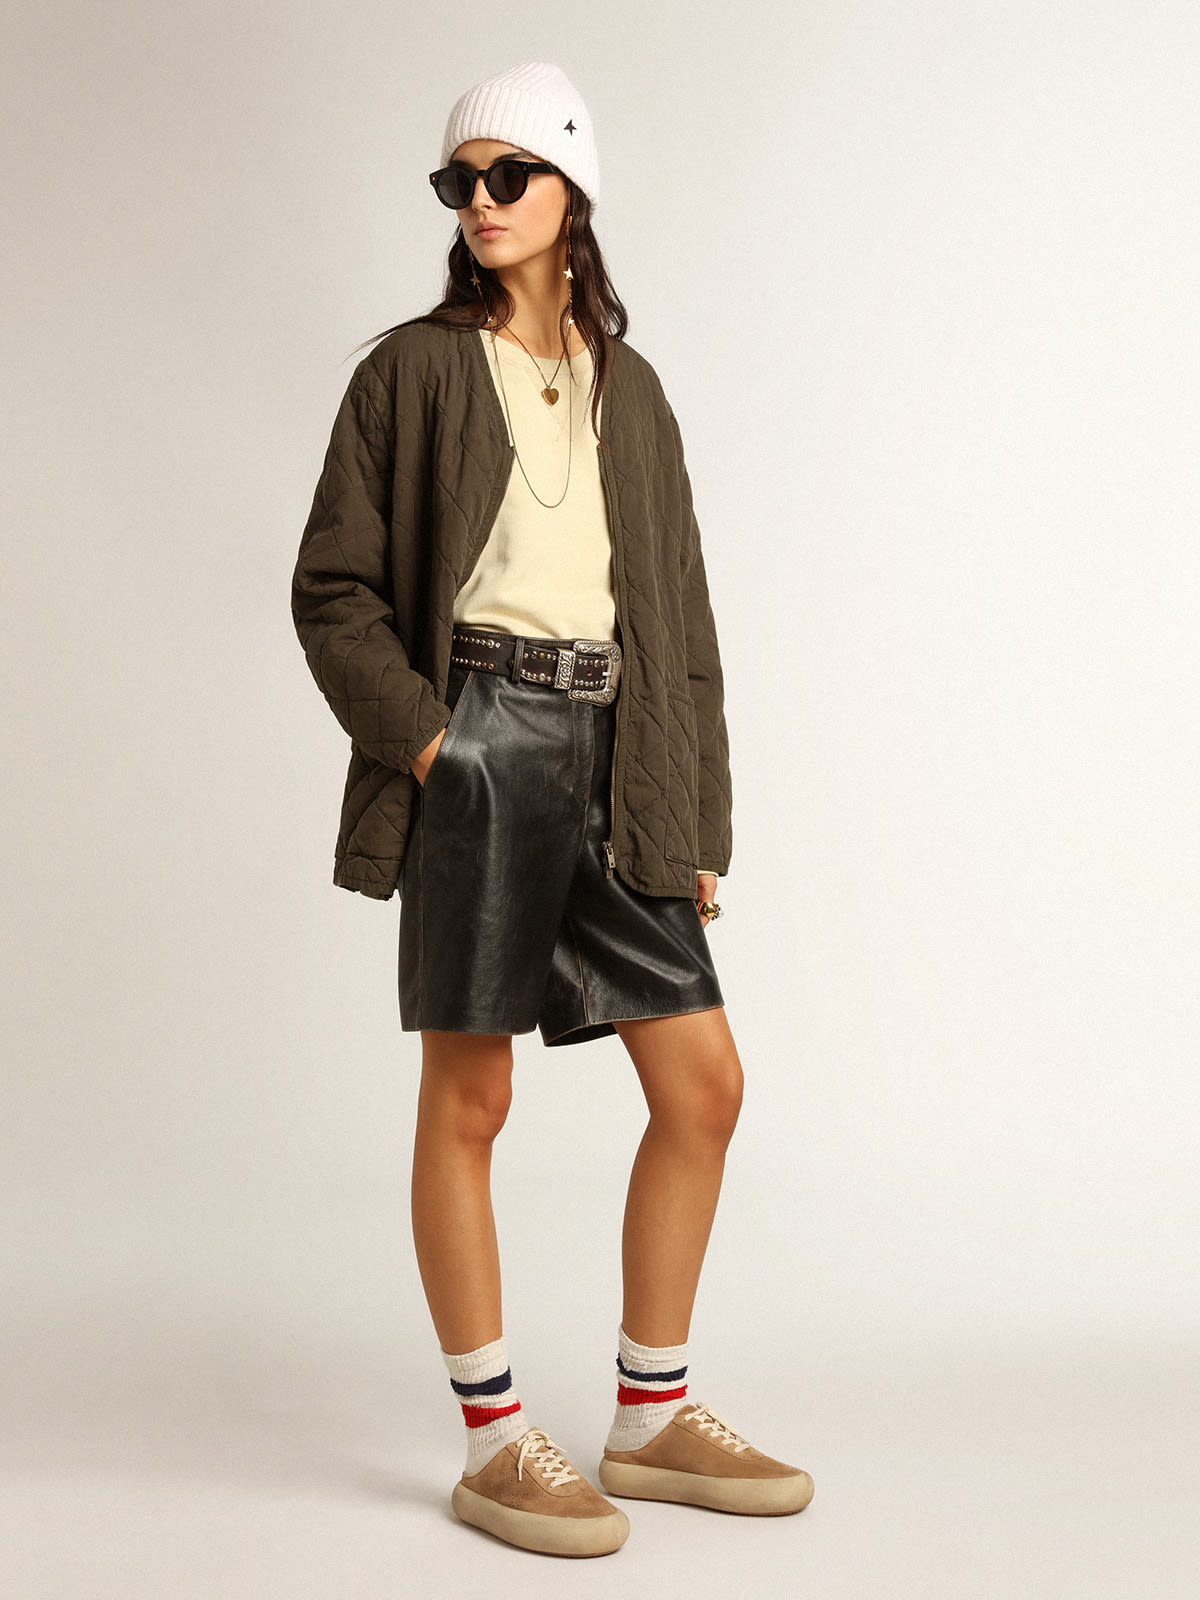 Golden Goose - Black leather Bermuda shorts with lived-in effect in 